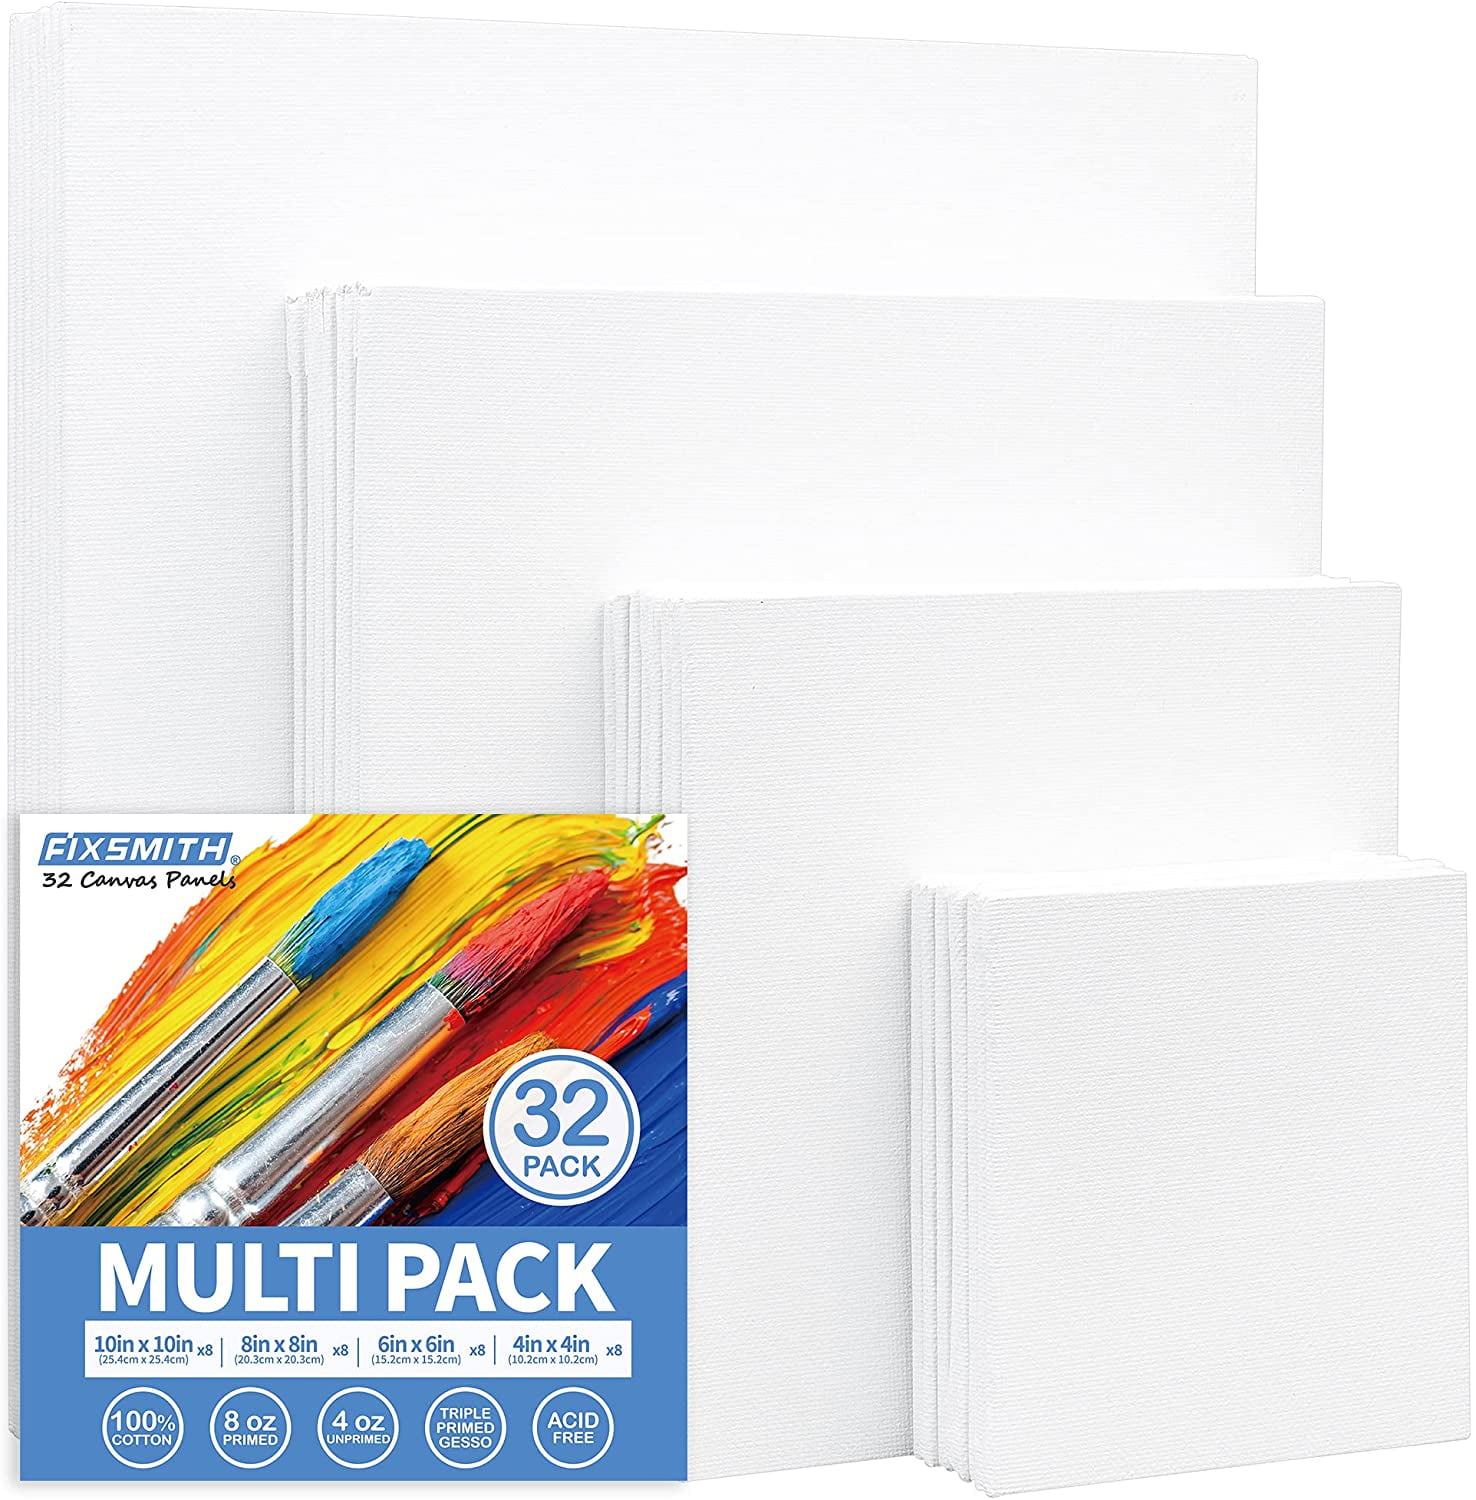 FIXSMITH Painting Canvas Panel Boards - 4x4 Inch Art Canvas,24 Pack Mini  Canvases,Primed Canvas Panels,100% Cotton,Acid Free,Professional Quality